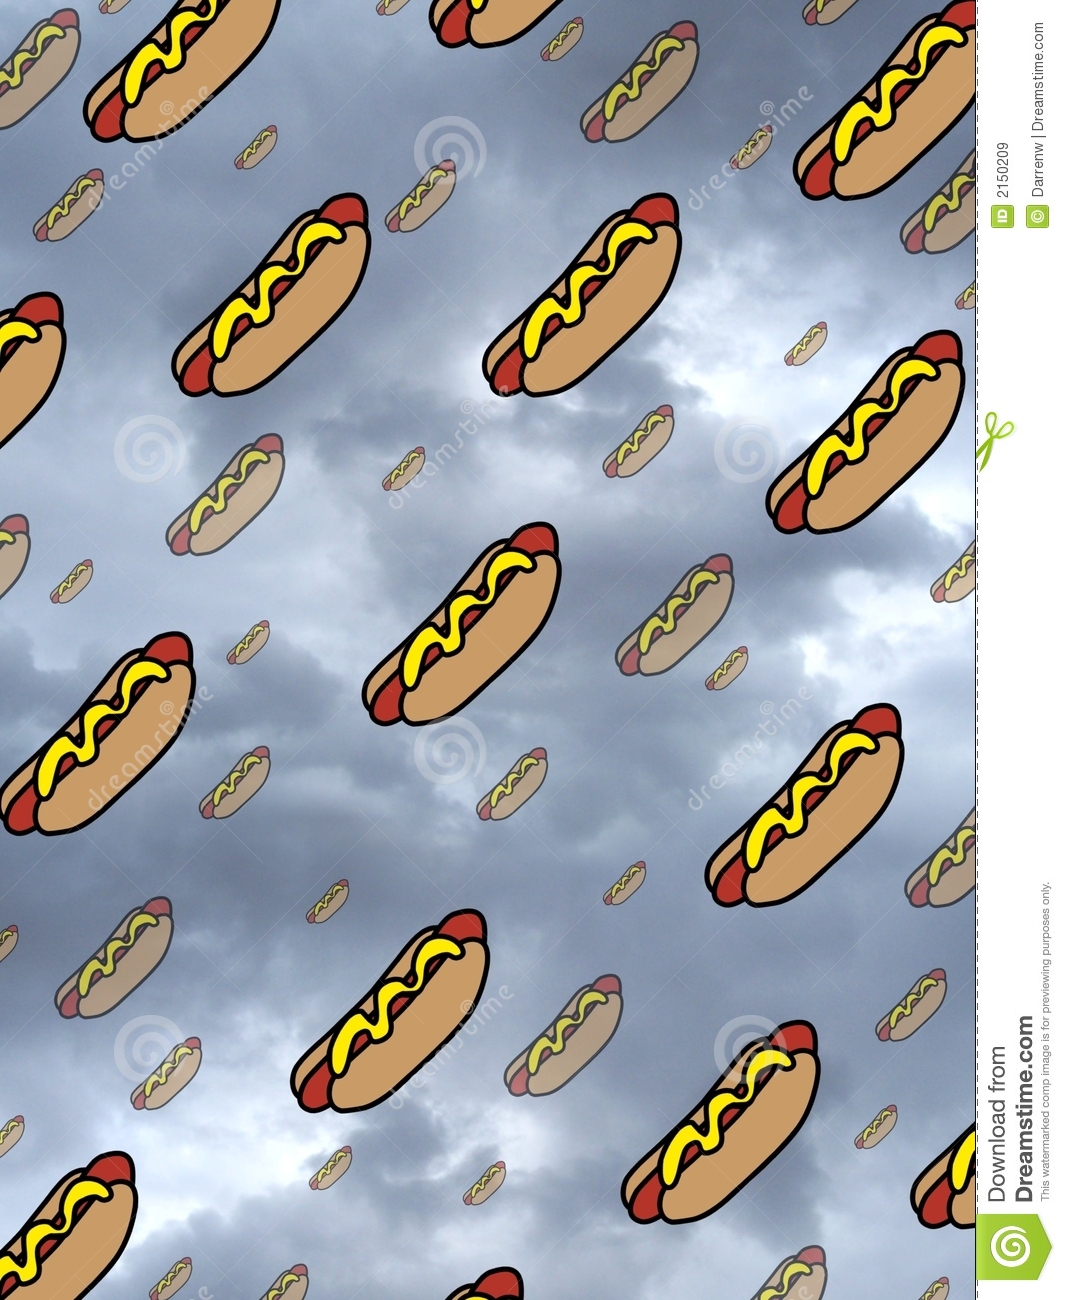 Illustration Of Lots Of Hot Dogs Falling Over A Sky Background